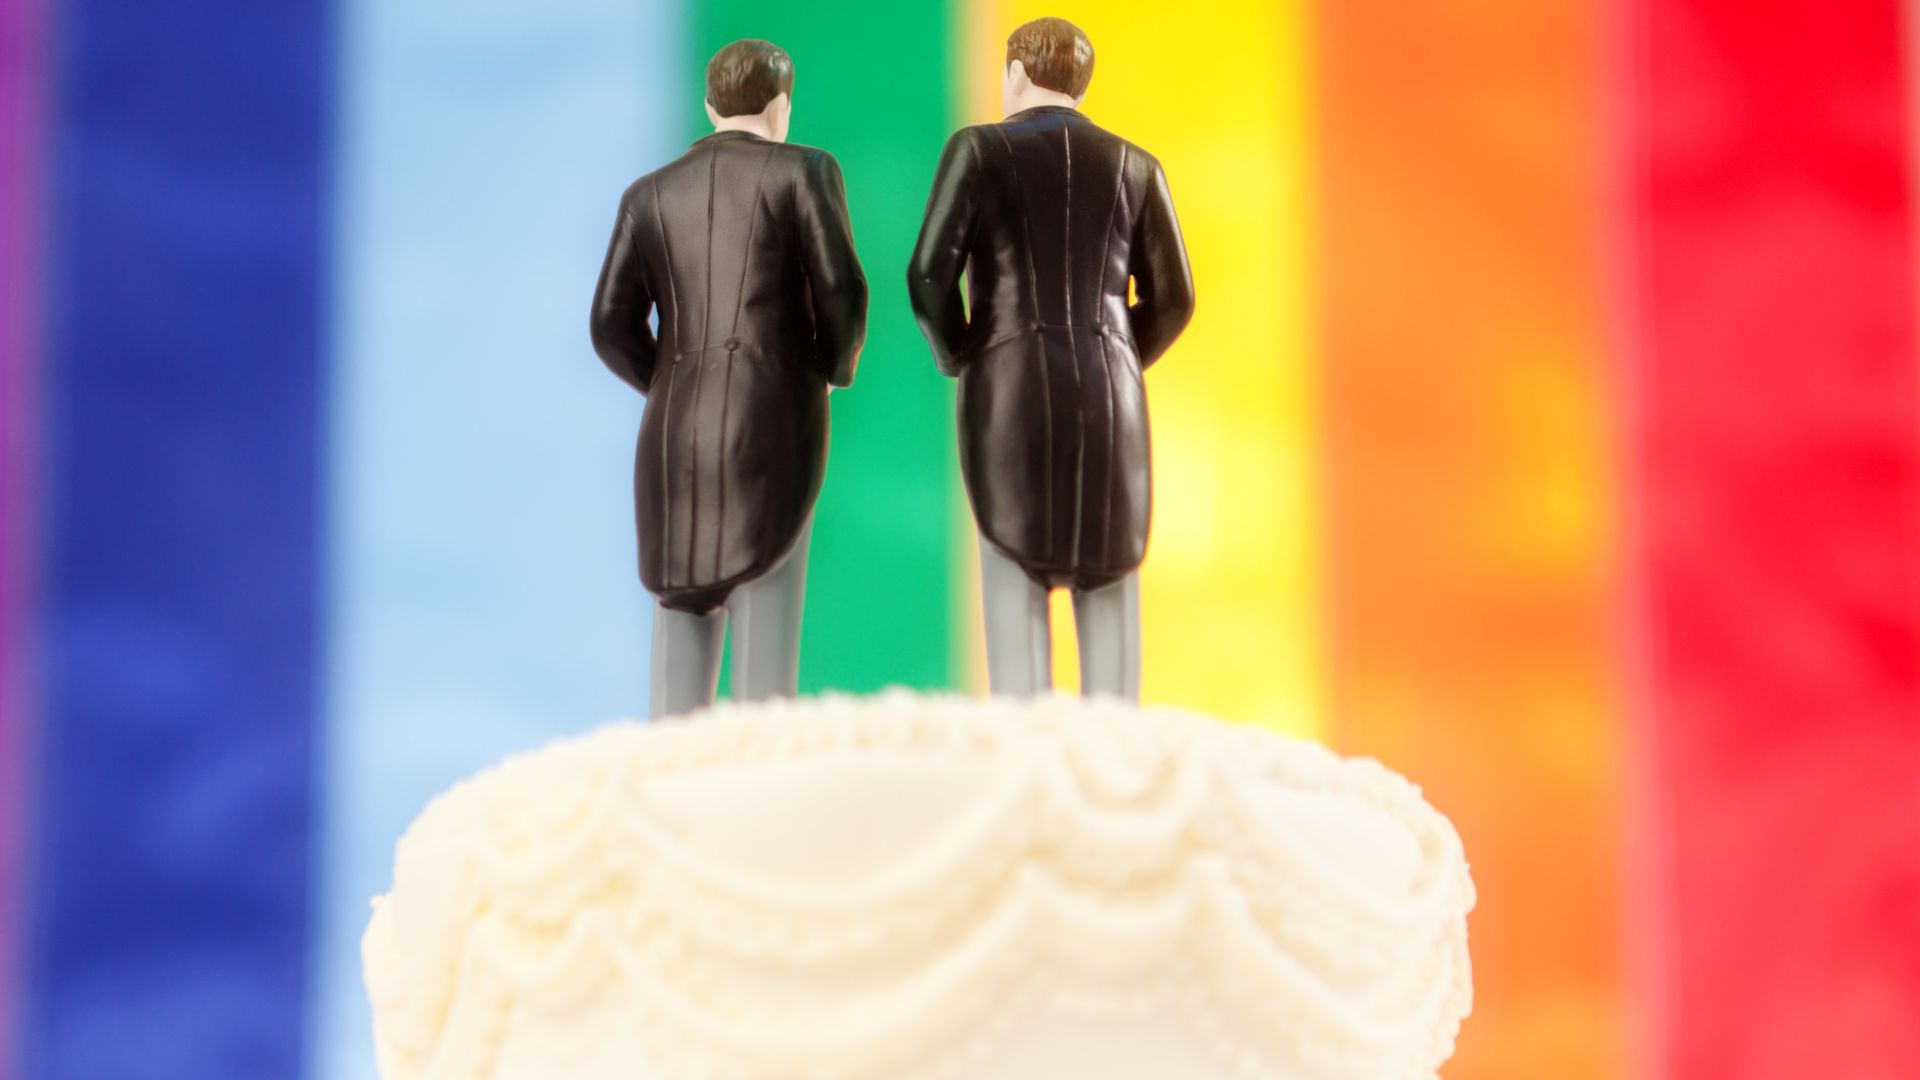 Study Reveals Decrease in Approval of Same-Sex Marriage